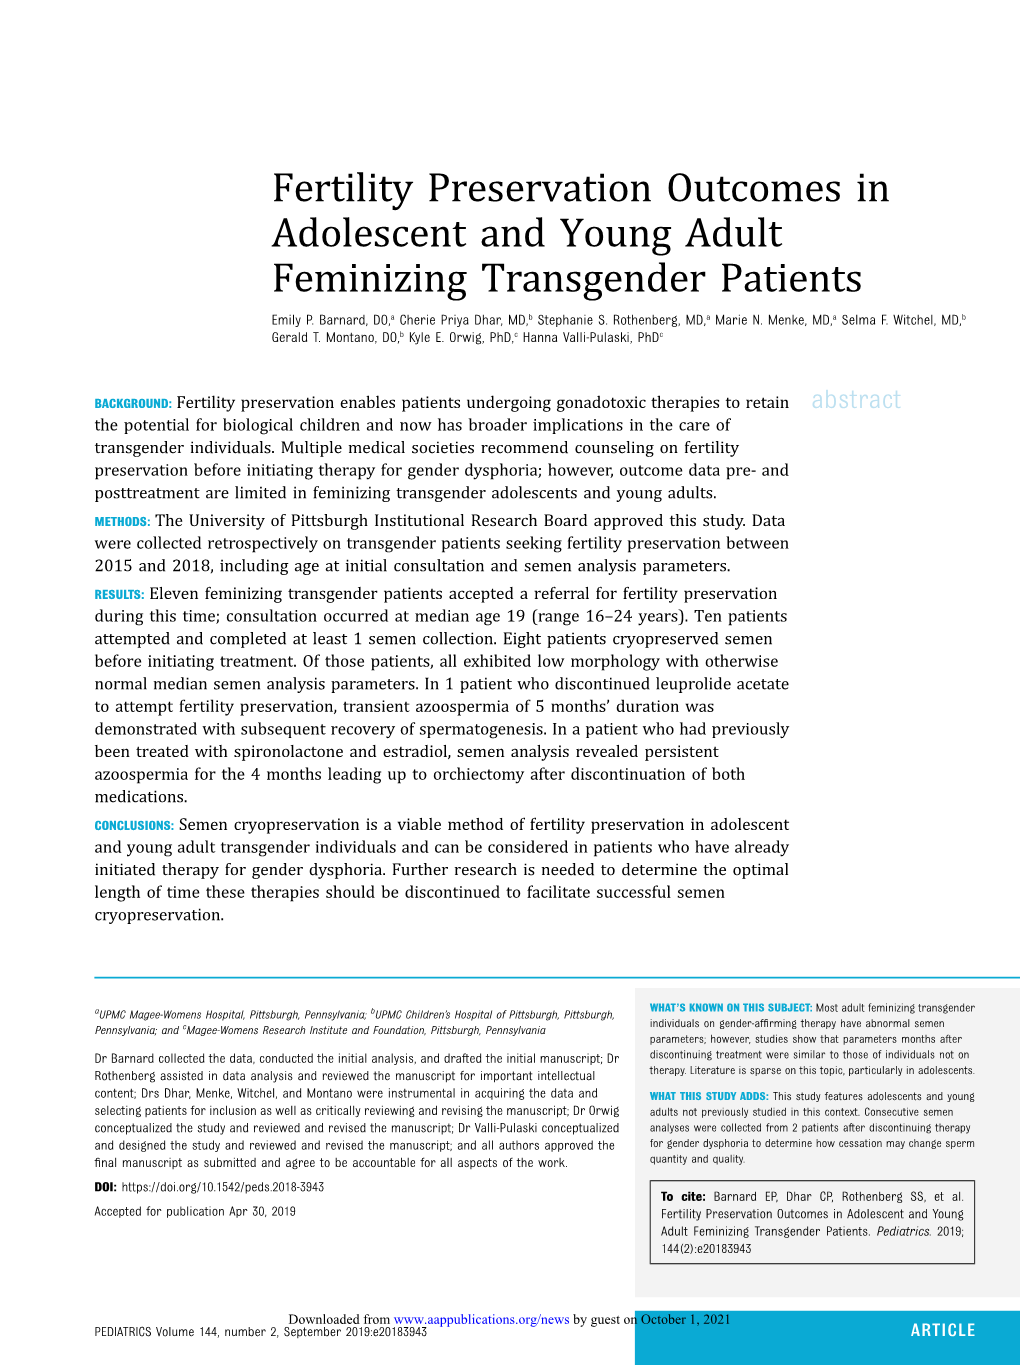 Fertility Preservation Outcomes in Adolescent and Young Adult Feminizing Transgender Patients Emily P